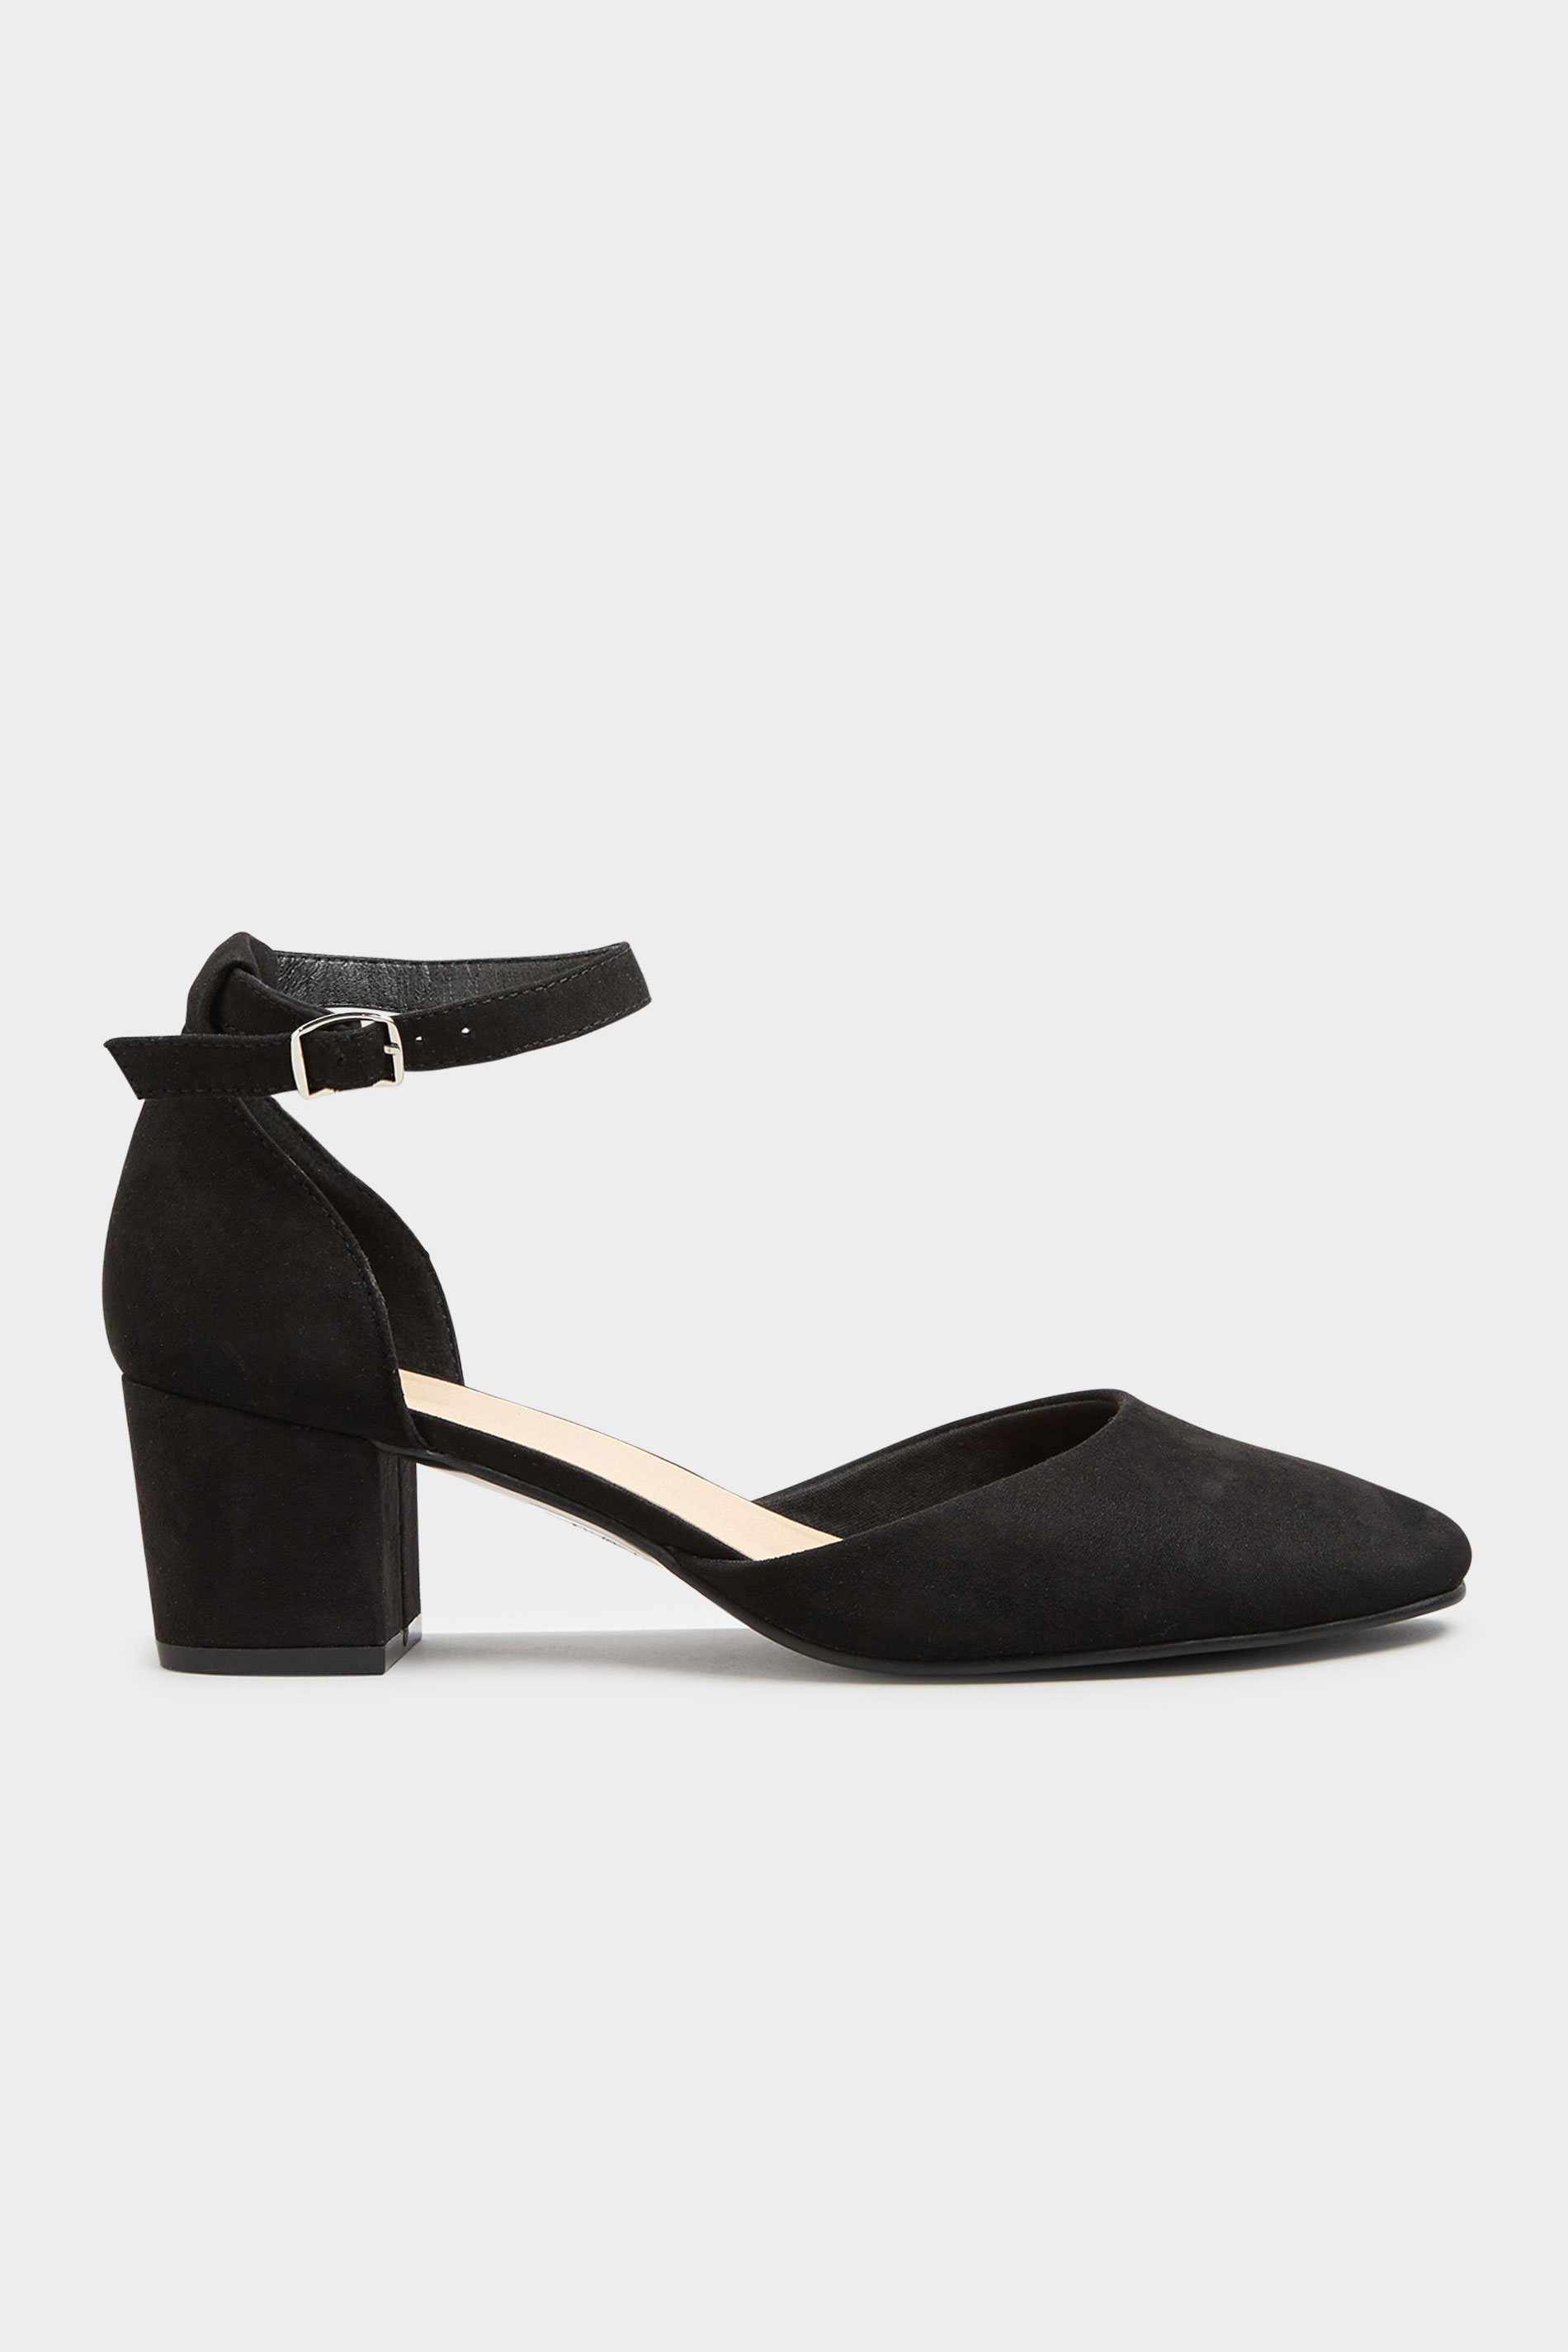 LTS Black Block Heel Court Shoes In Standard Fit | Long Tall Sally 3